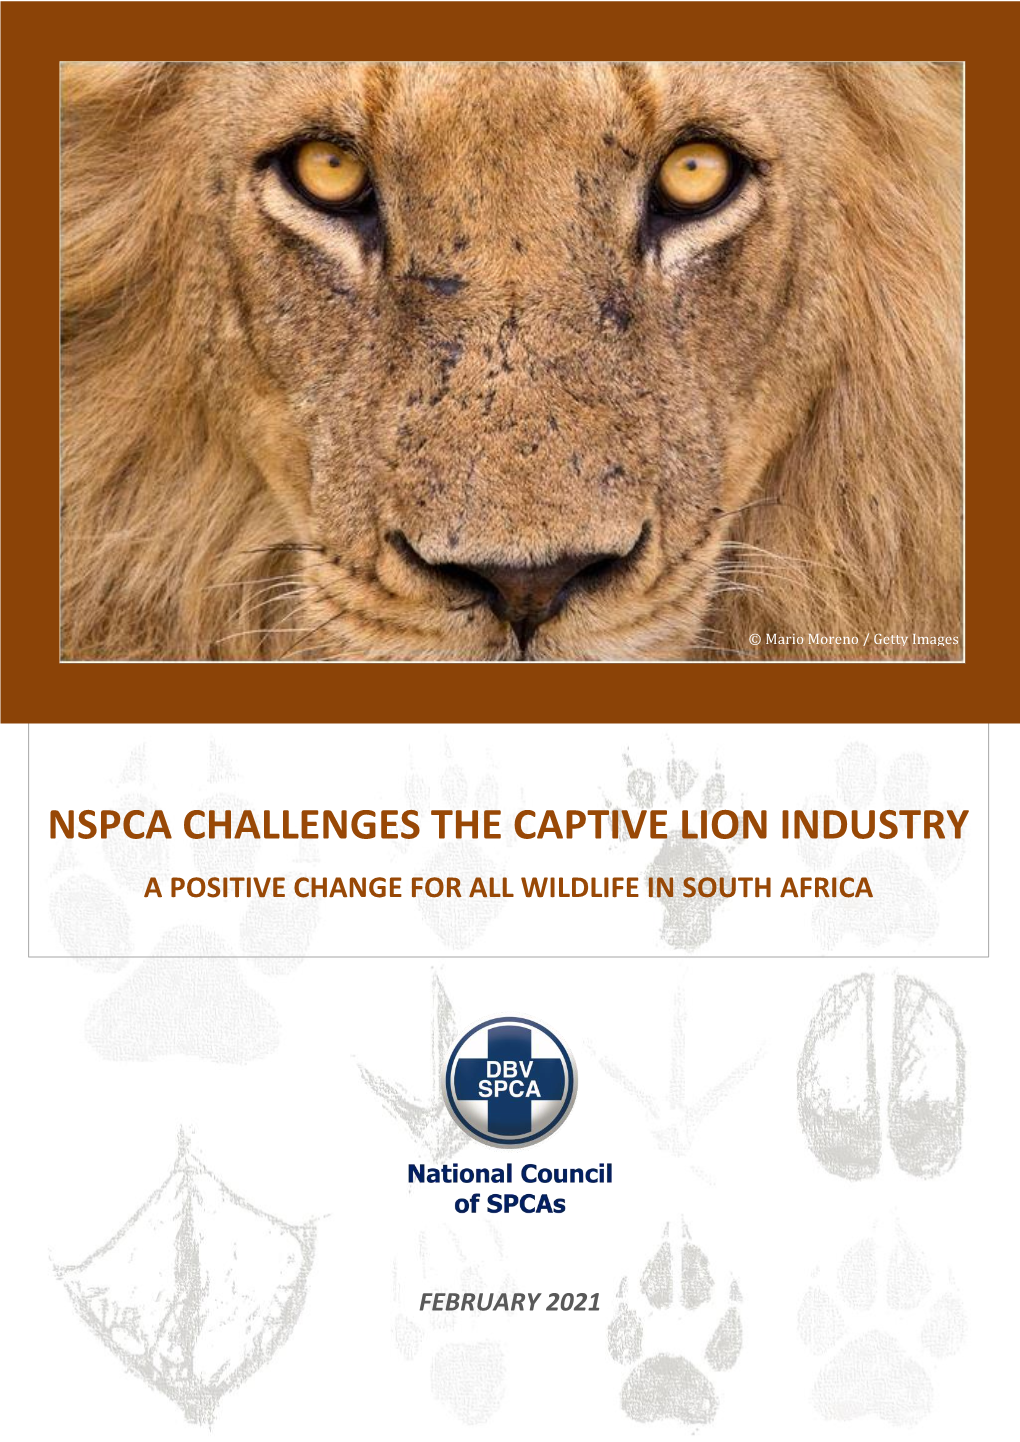 Nspca Challenges the Captive Lion Industry